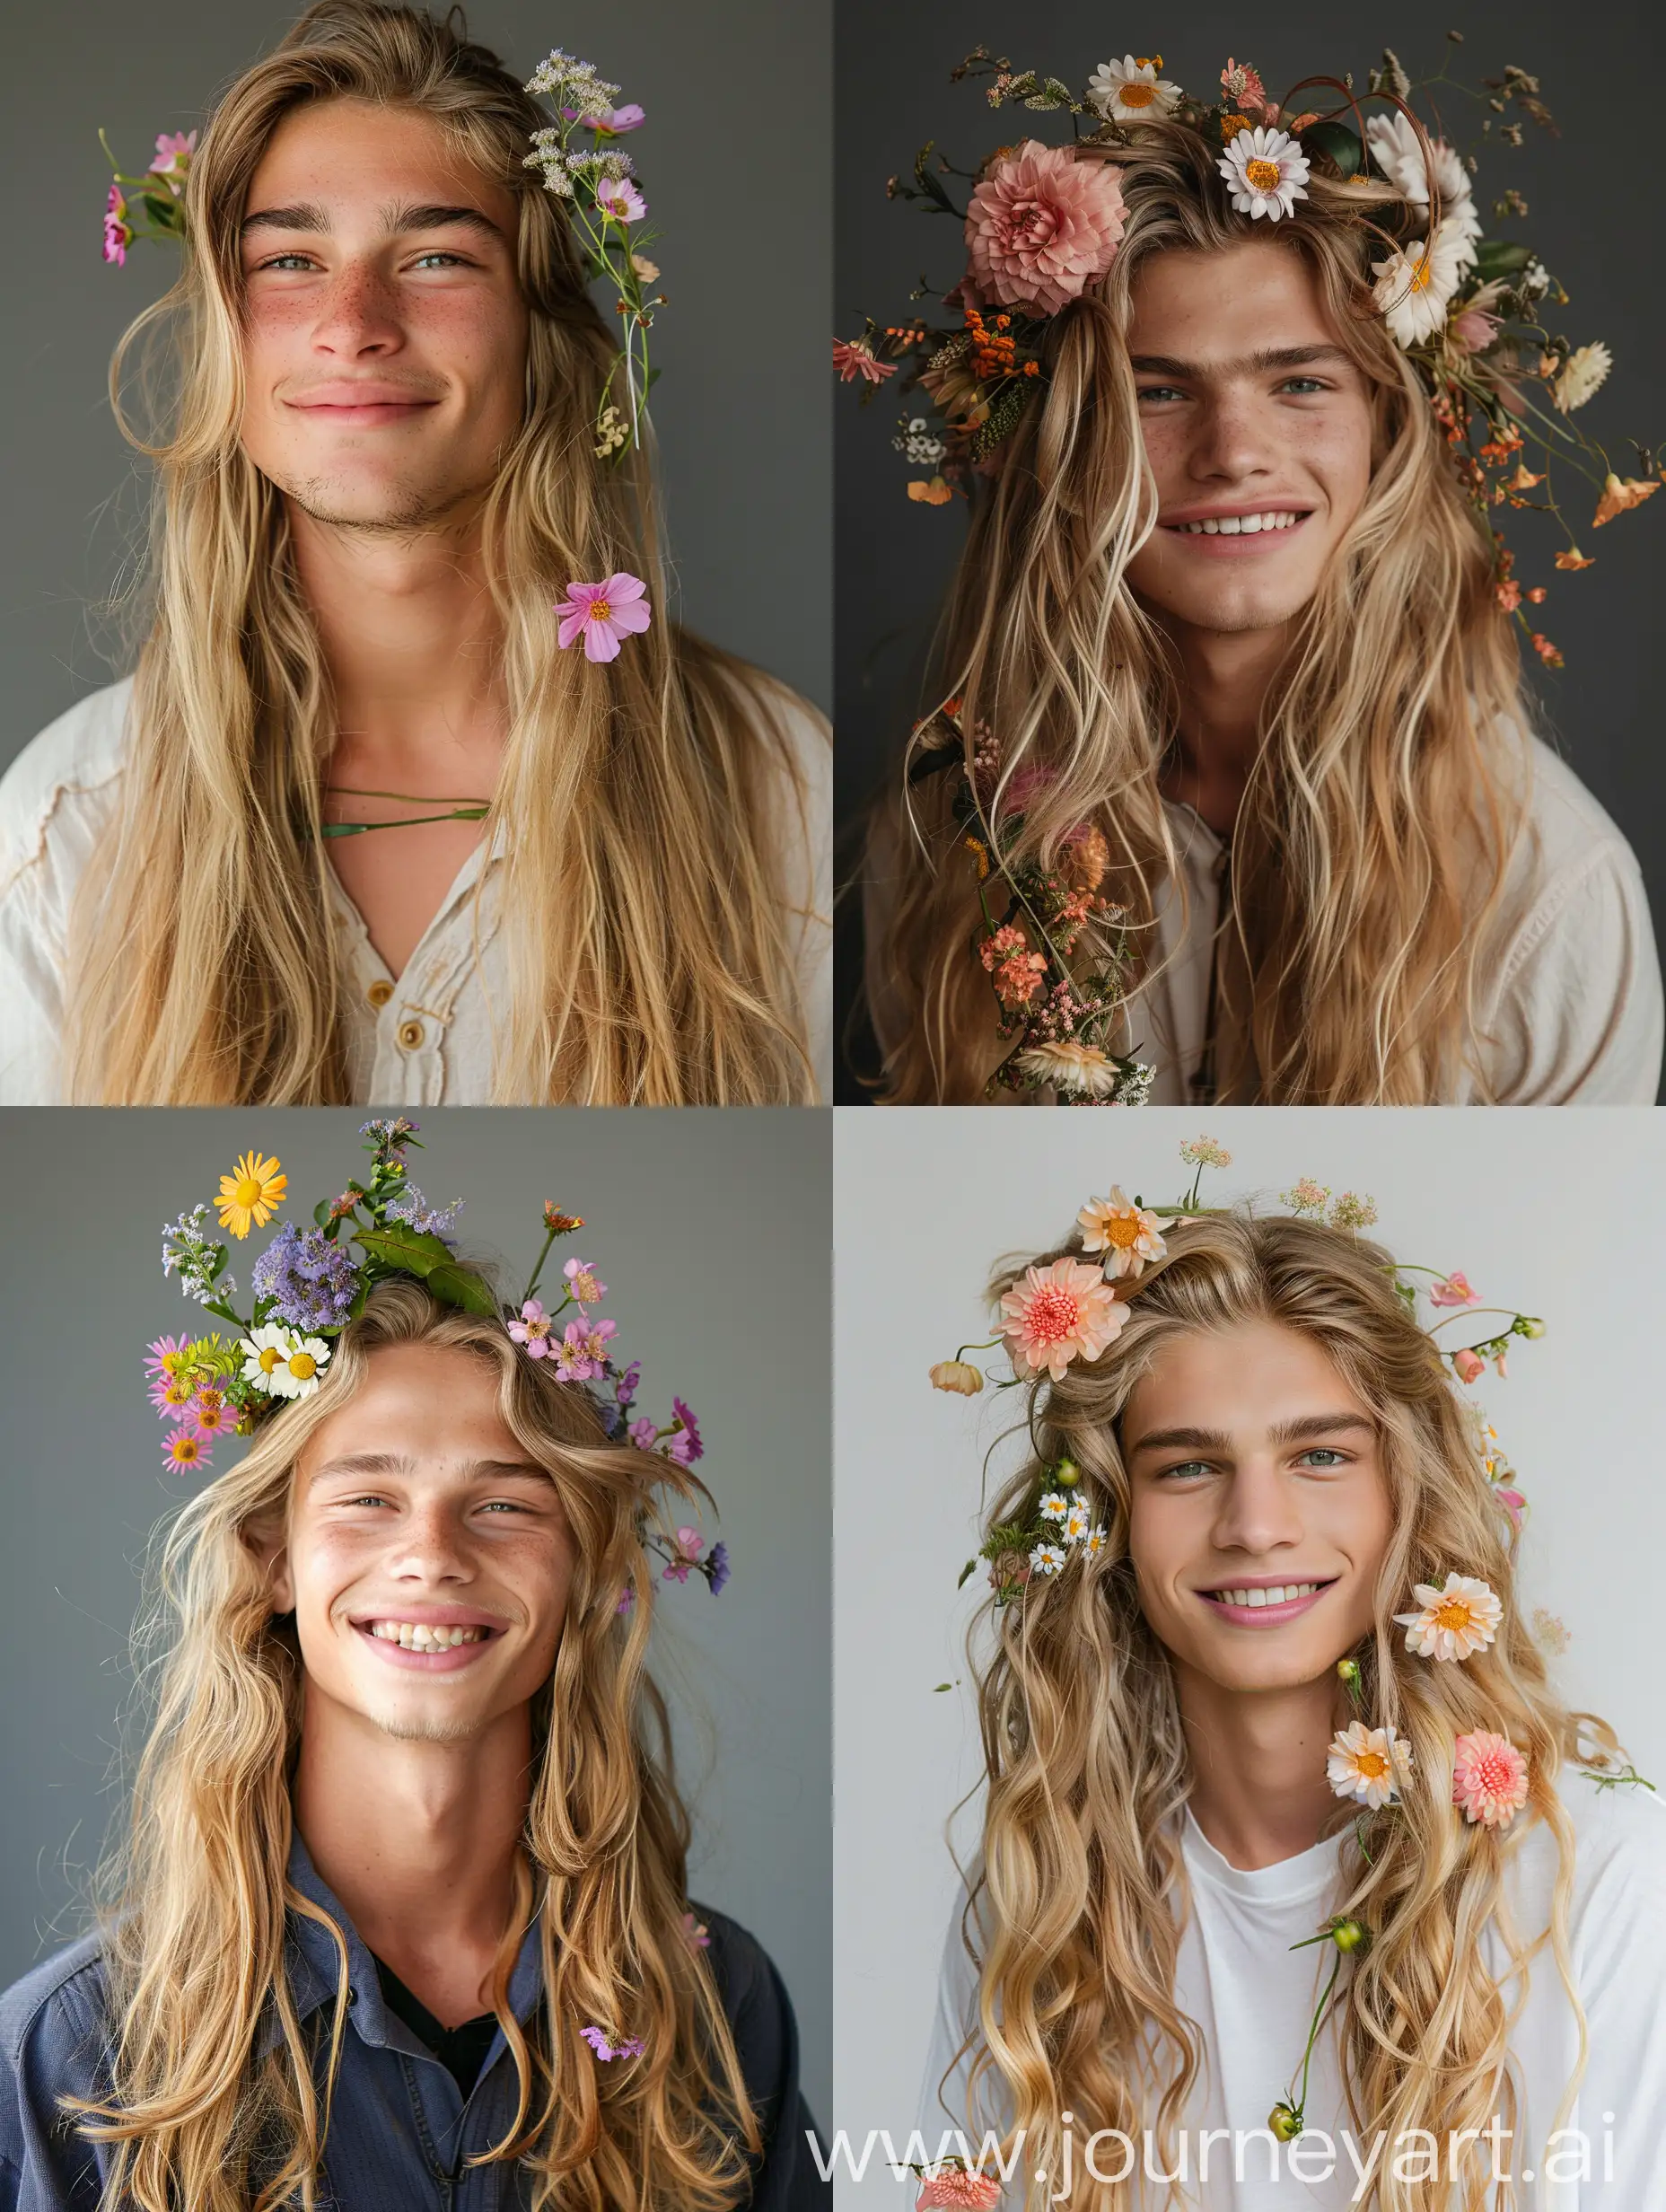 Attractive-Smiling-Young-Man-with-Blonde-Hair-and-Flowers-Realistic-Portrait